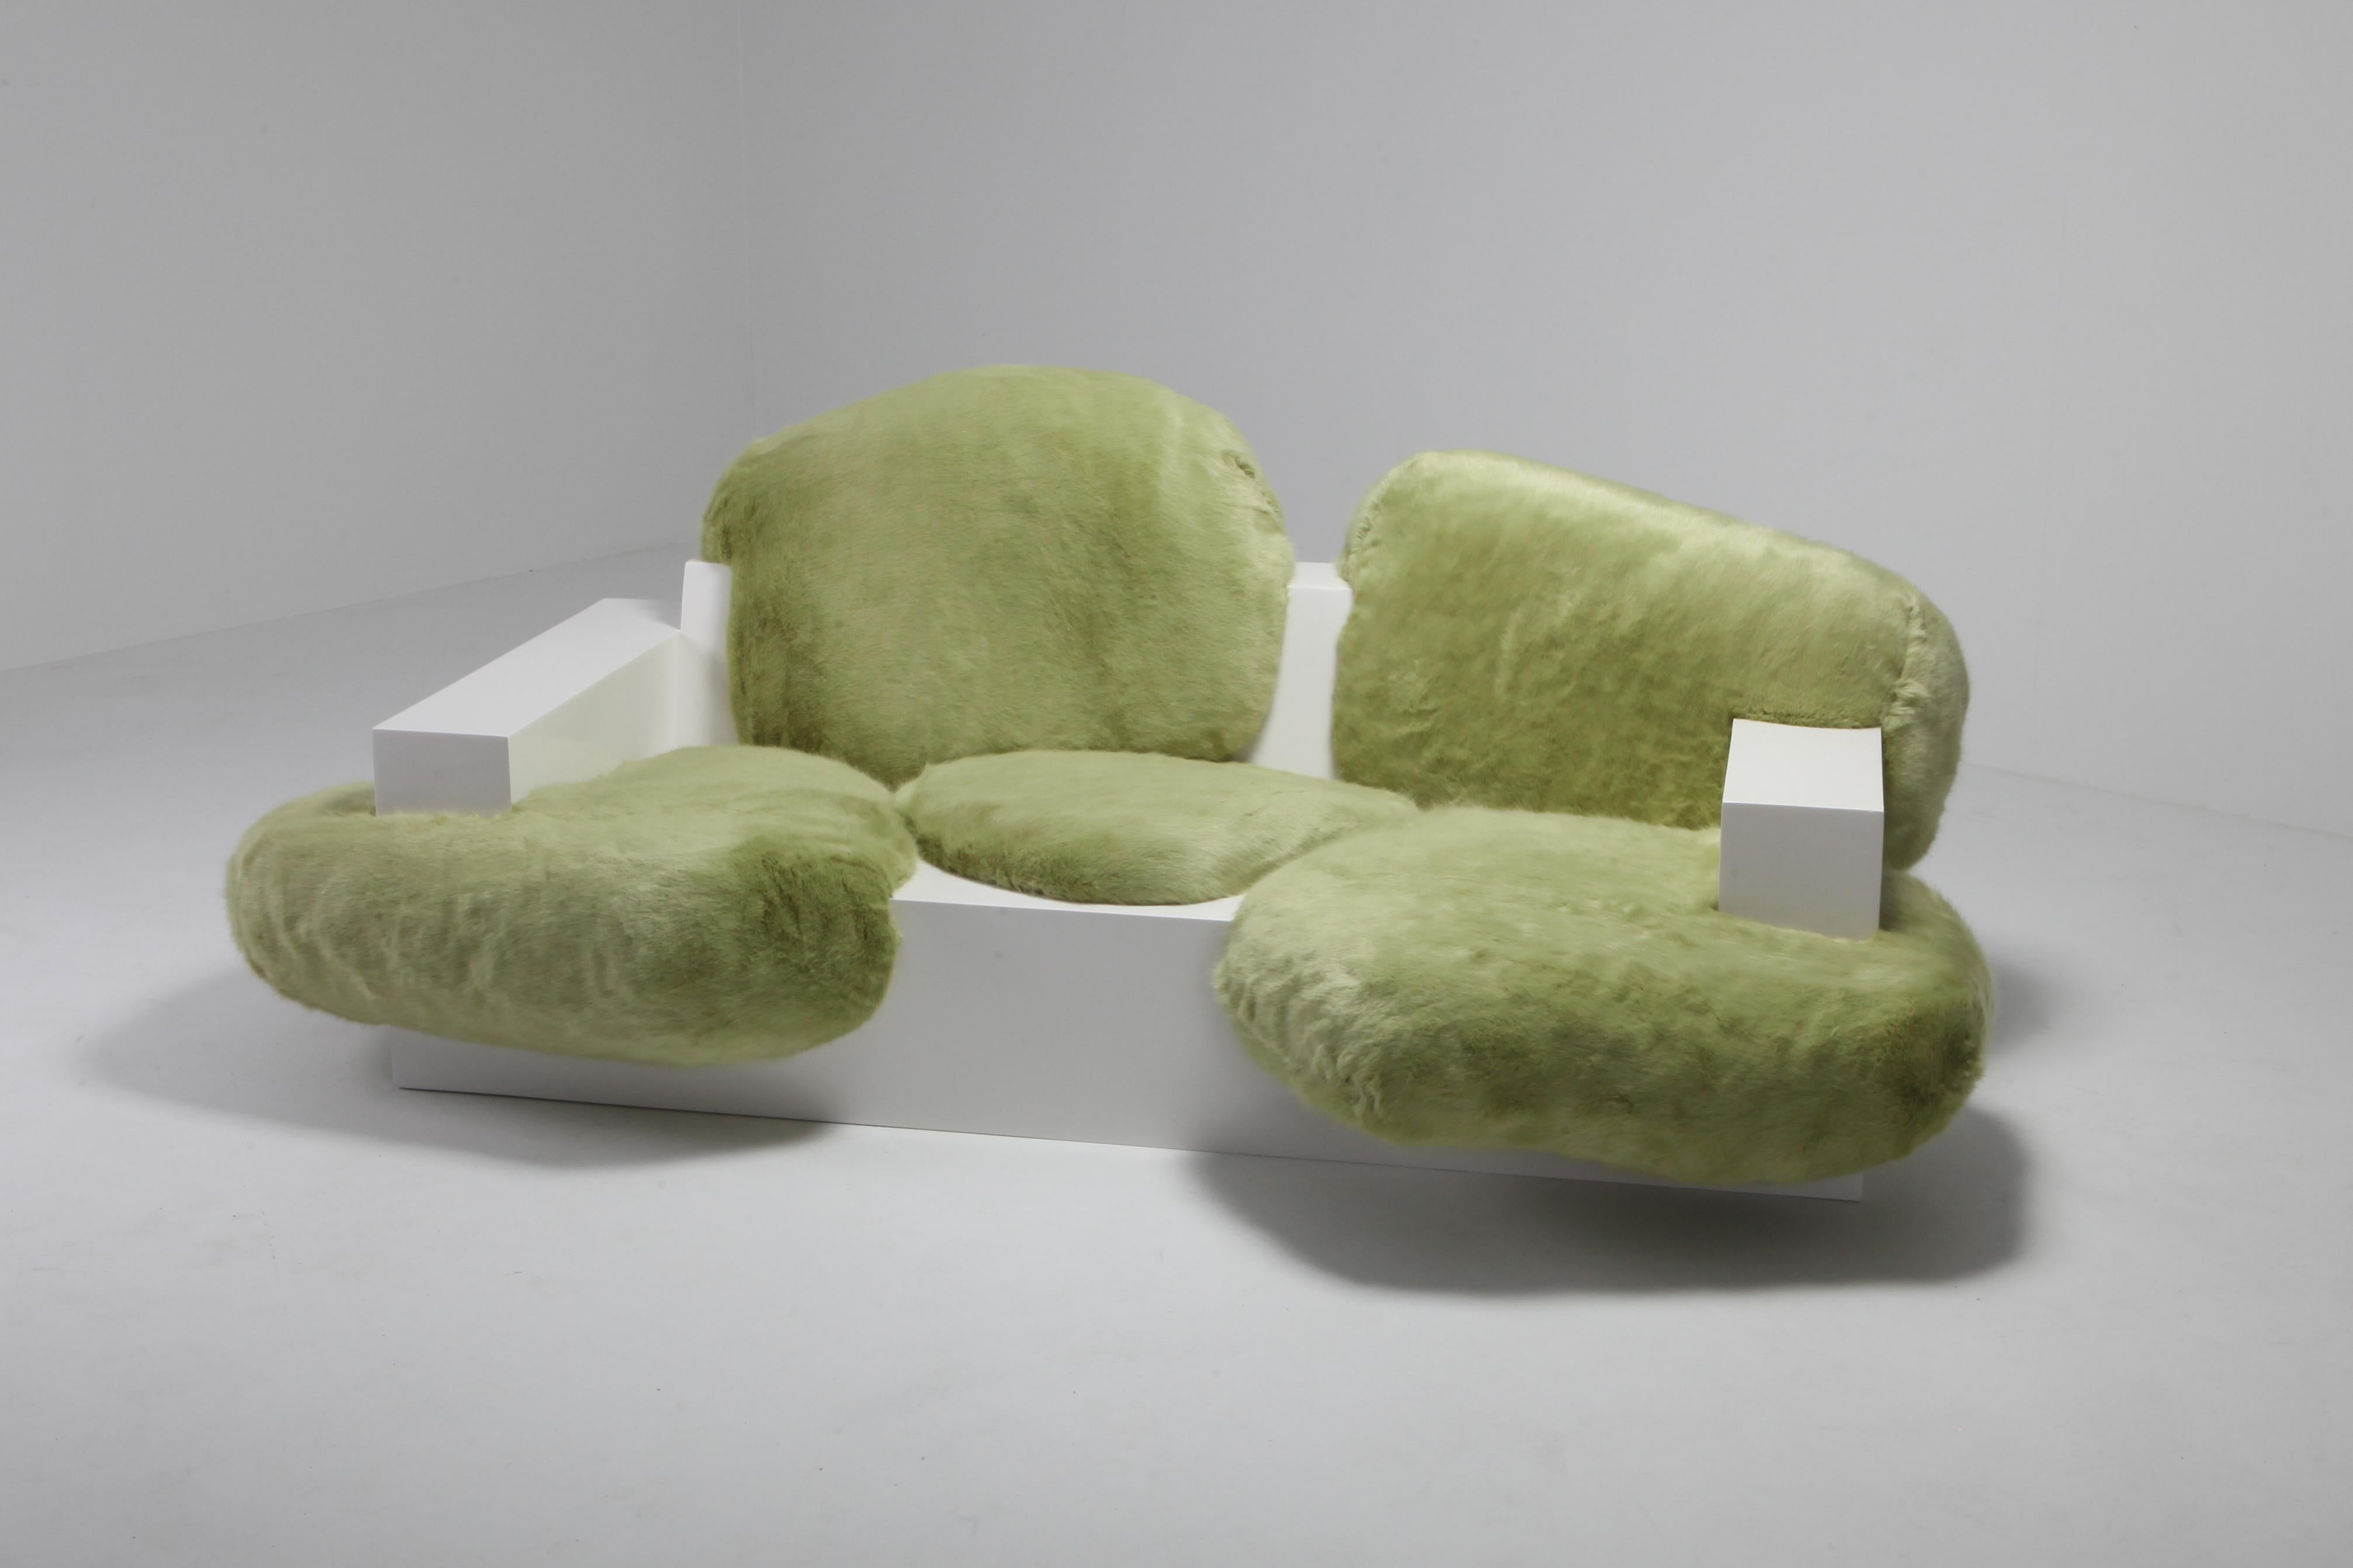 Pillow couch (prototype) in white lacquer and green faux fur
Sizes: width 242 cm, depth 135 cm, height 87 cm material: wood, PU-foam, faux fur, car paint edition: prototype.

Schimmel & Schweikle have announced their first solo exhibition 'A tree